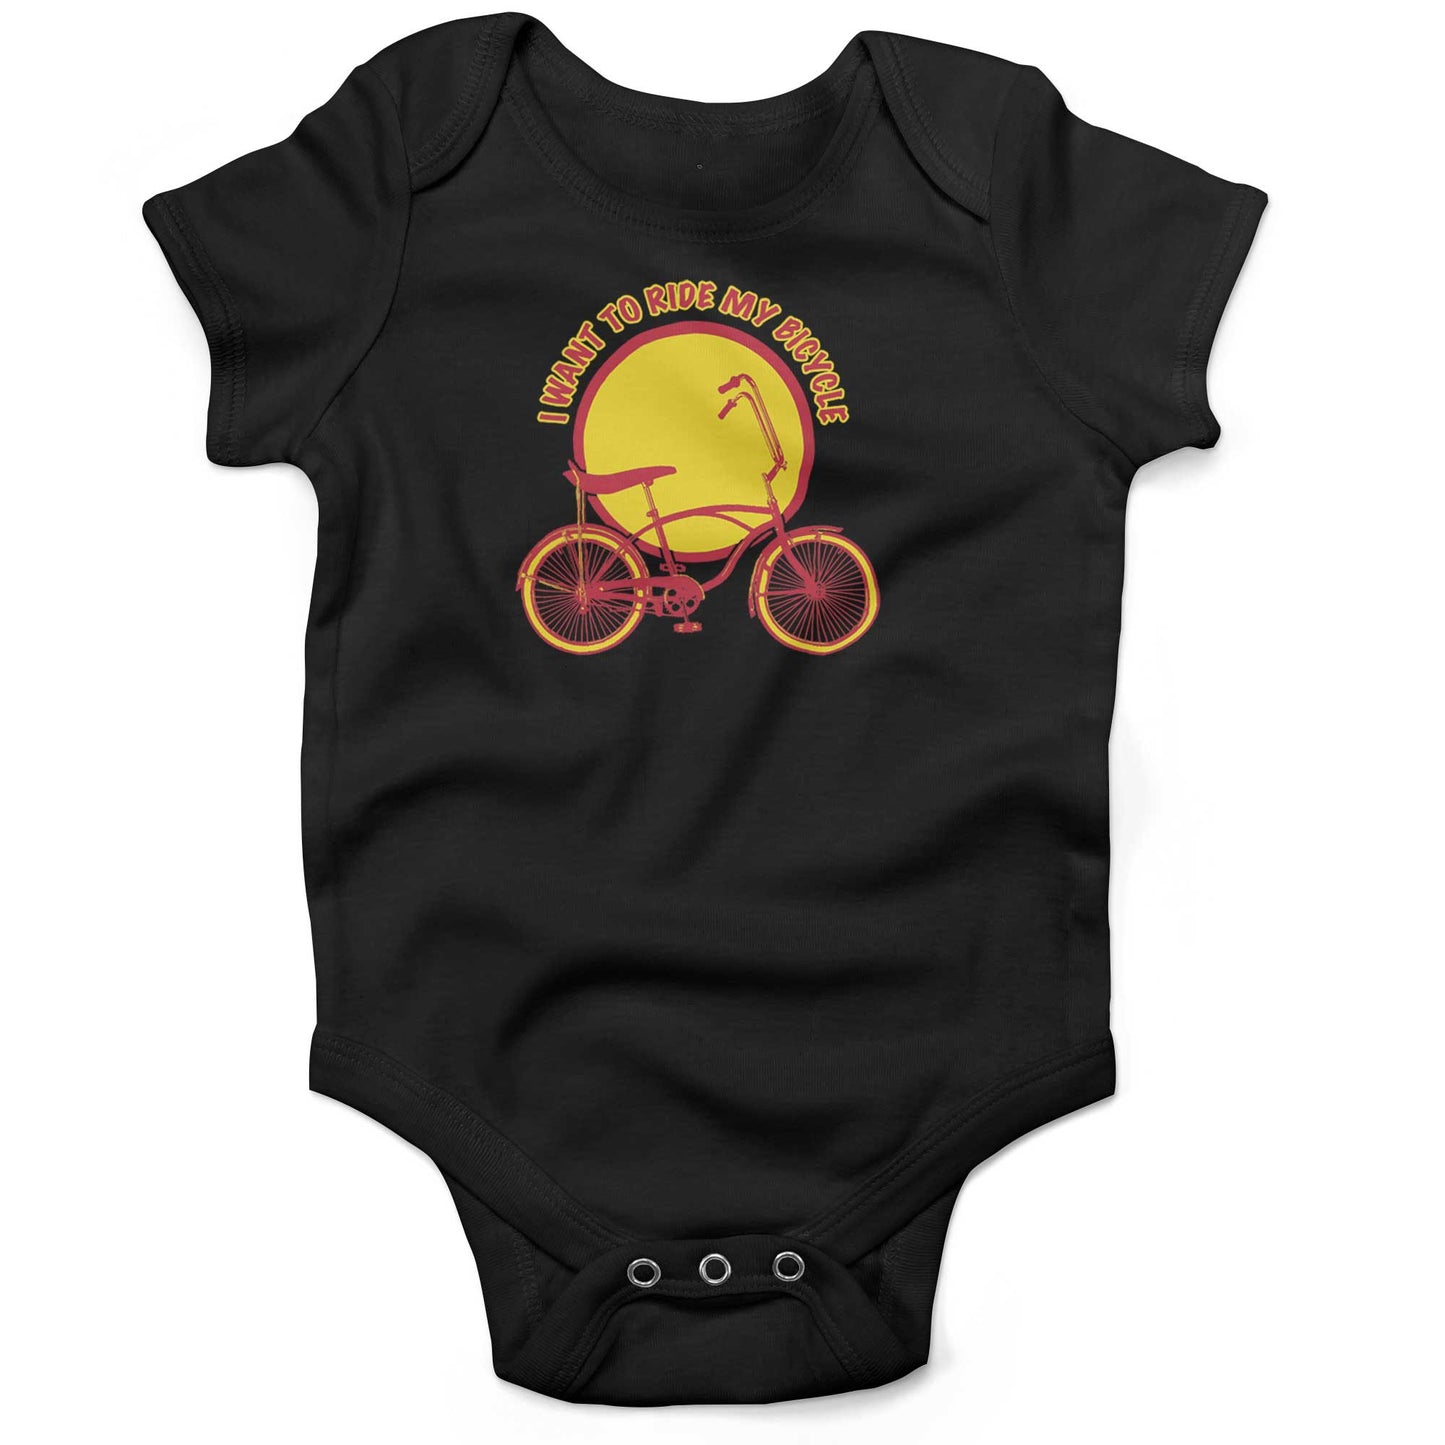 I Want To Ride My Bicycle Infant Bodysuit or Raglan Baby Tee-Organic Black-3-6 months